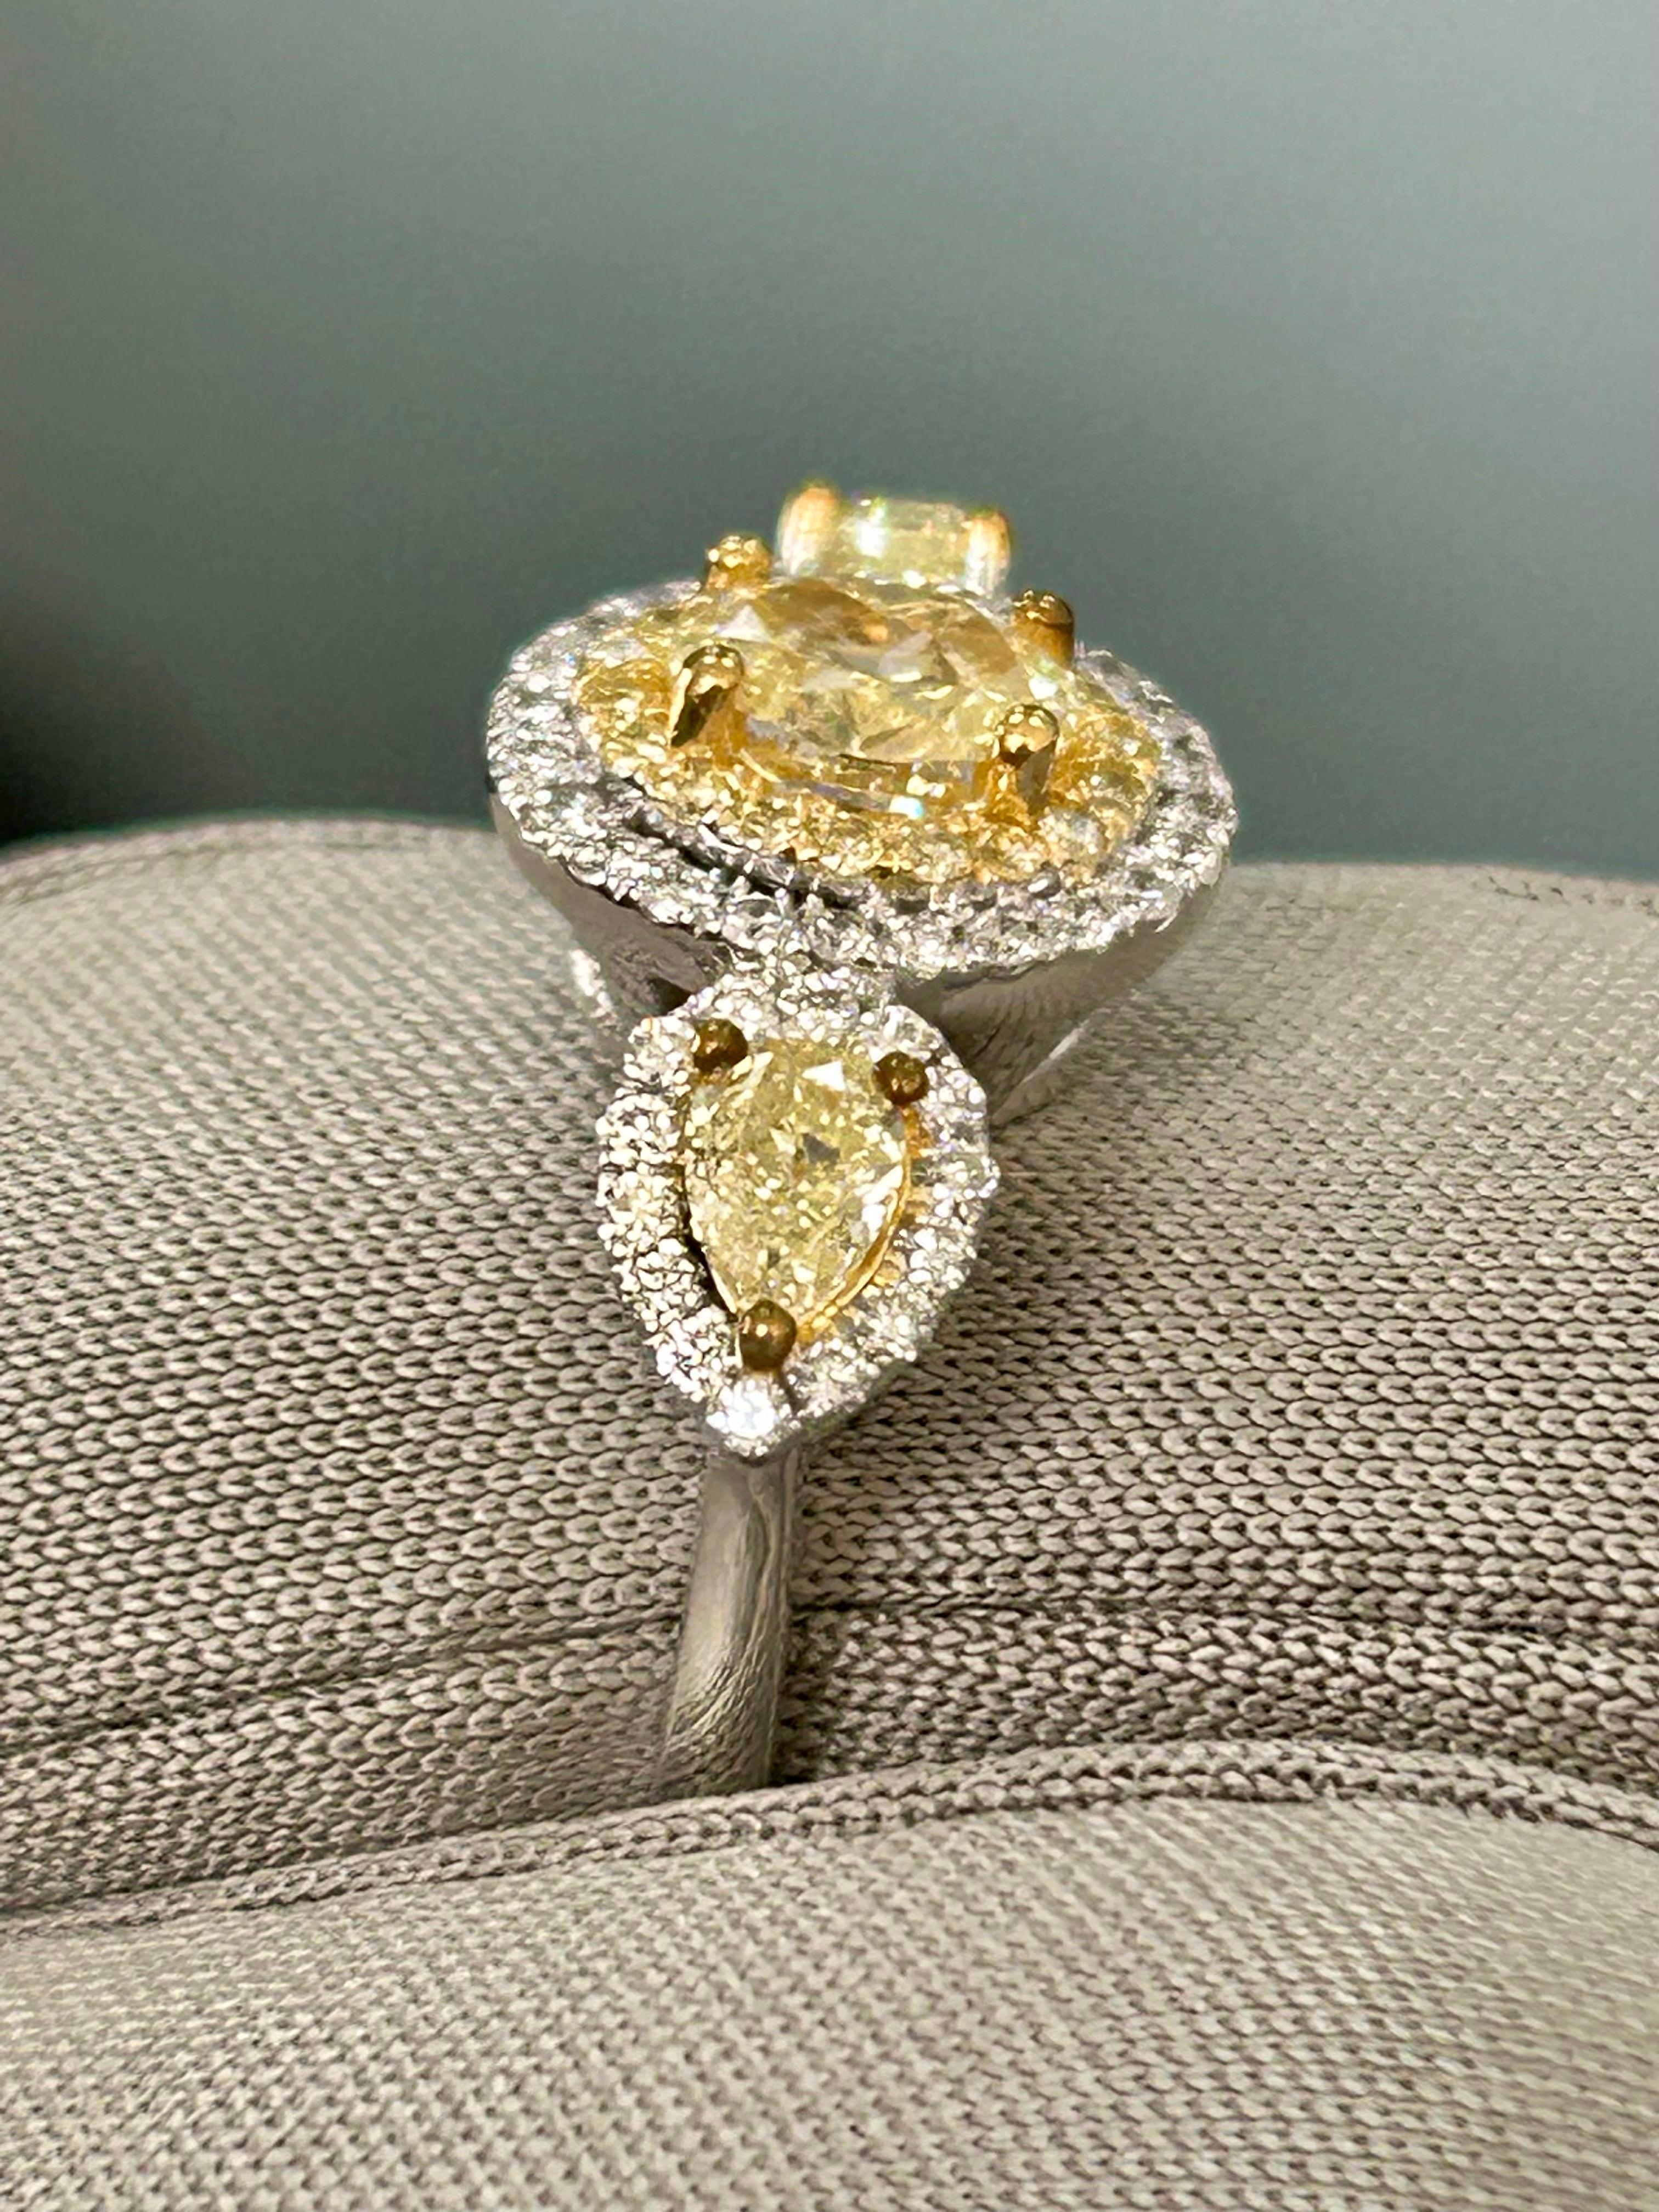 This is a Luscious Lemons™️ Natural Fancy Yellow Diamond 3 stone Oval ring with Pear side stones and white melee halo. The ring size is 6.5 and is in 14k WG/YG. 1.20 cts total. Yellow Oval Center = 0.50 cts Fancy Yellow VS clarity. Yellow Pear sides